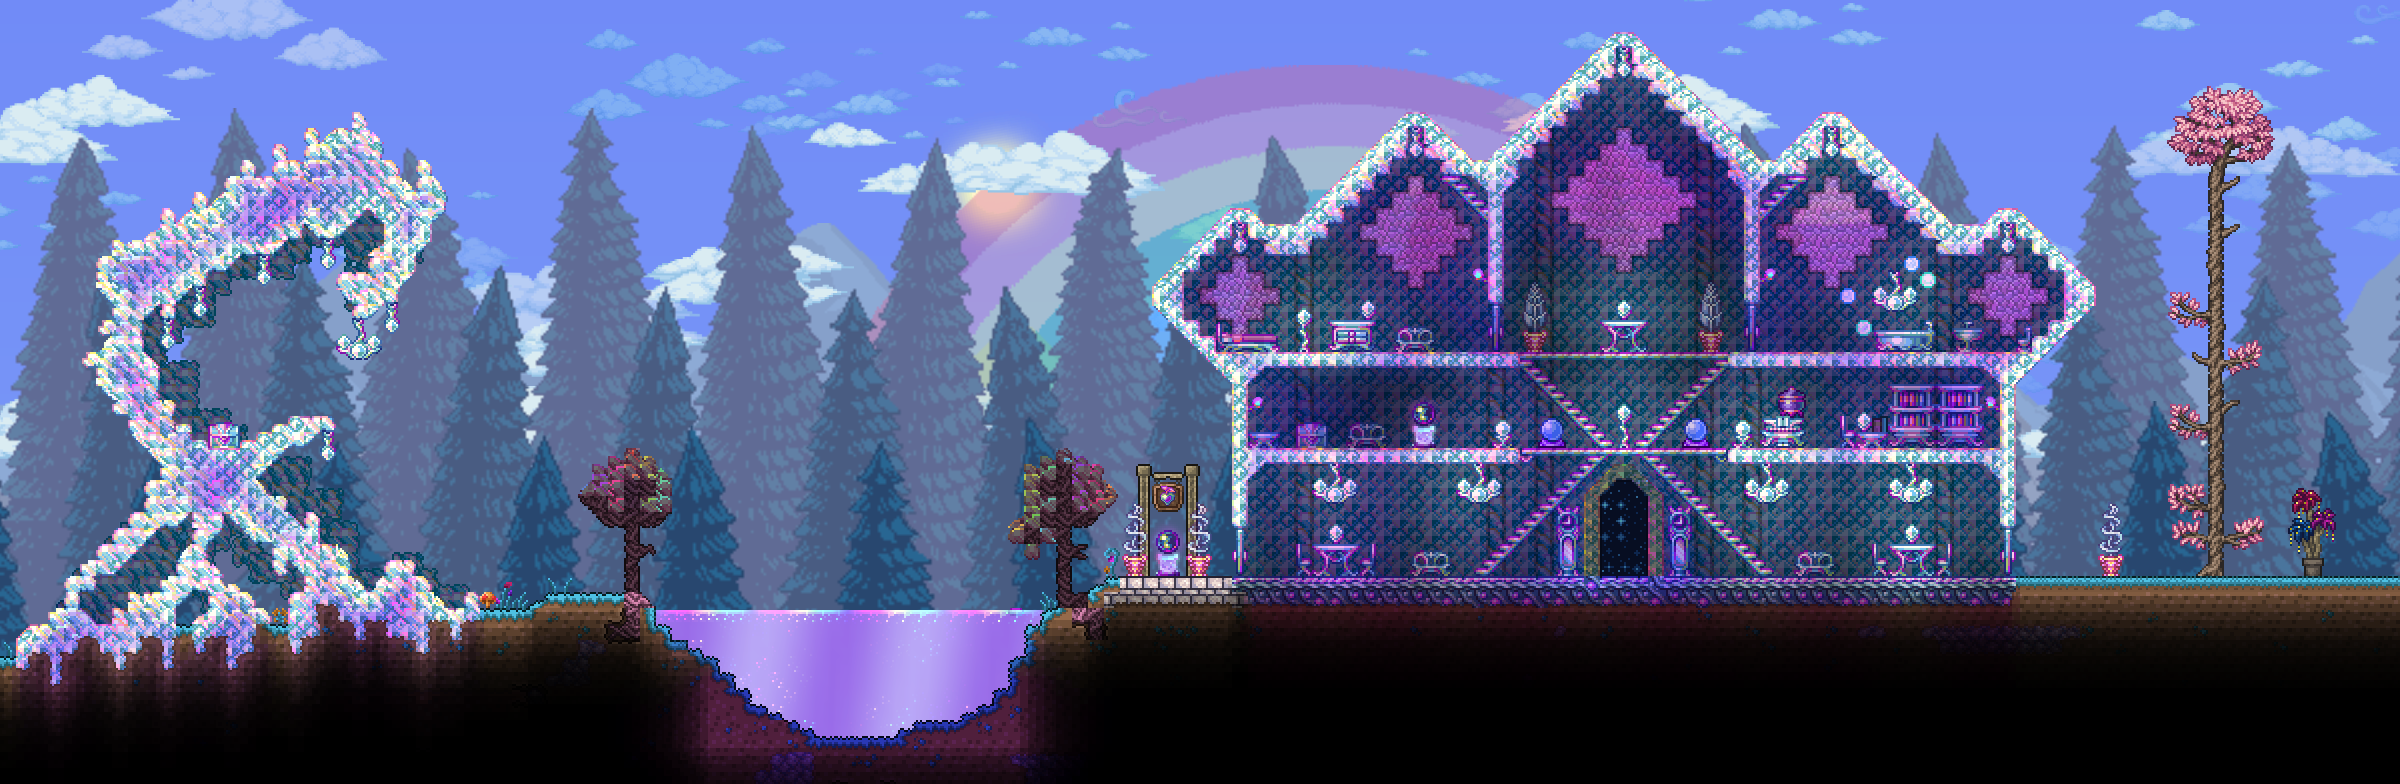 Terraria still sells like hot cakes, and that's why its devs can't move  on